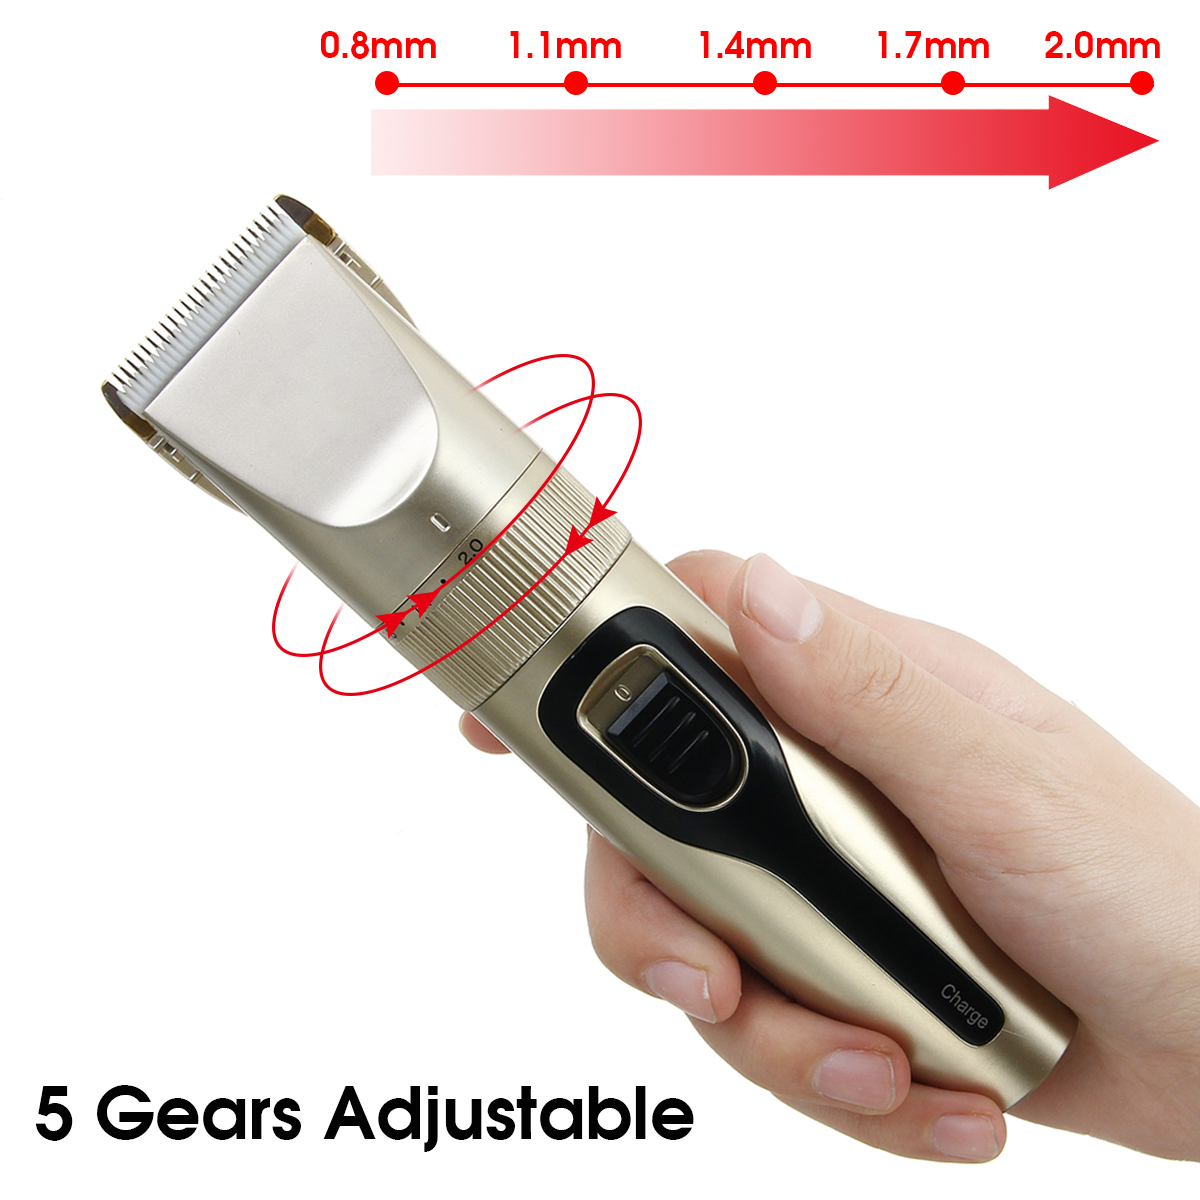 100V-240V-Rechargeable-Electric-Cat-Dog-Clipper-Cordless-Pet-Clippers-Hair-Shaver-Grooming-Trimmer-1448851